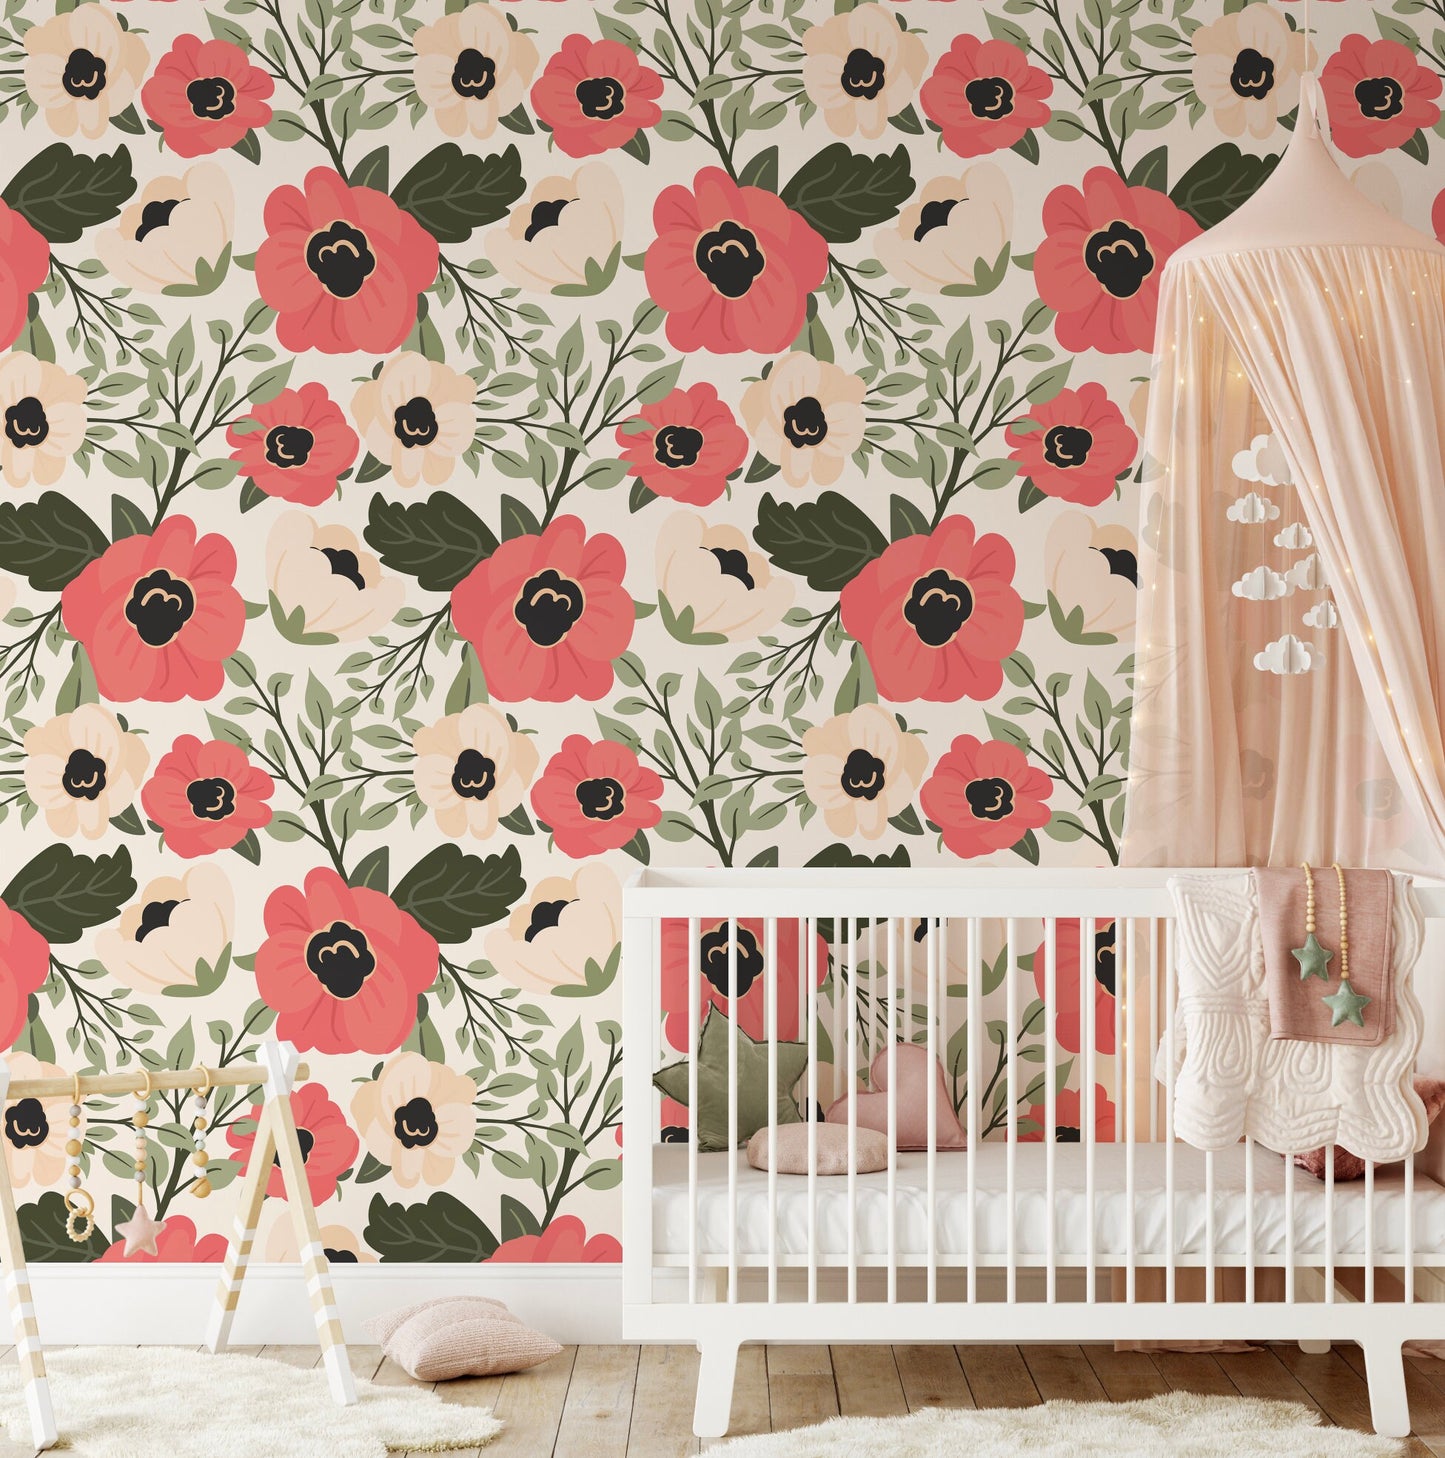 Peel and Stick Wallpaper Floral/ Coral and Cream Floral Wallpaper/ Removable Wallpaper/ Unpasted Wallpaper/ Pre-Pasted Wallpaper WW1713